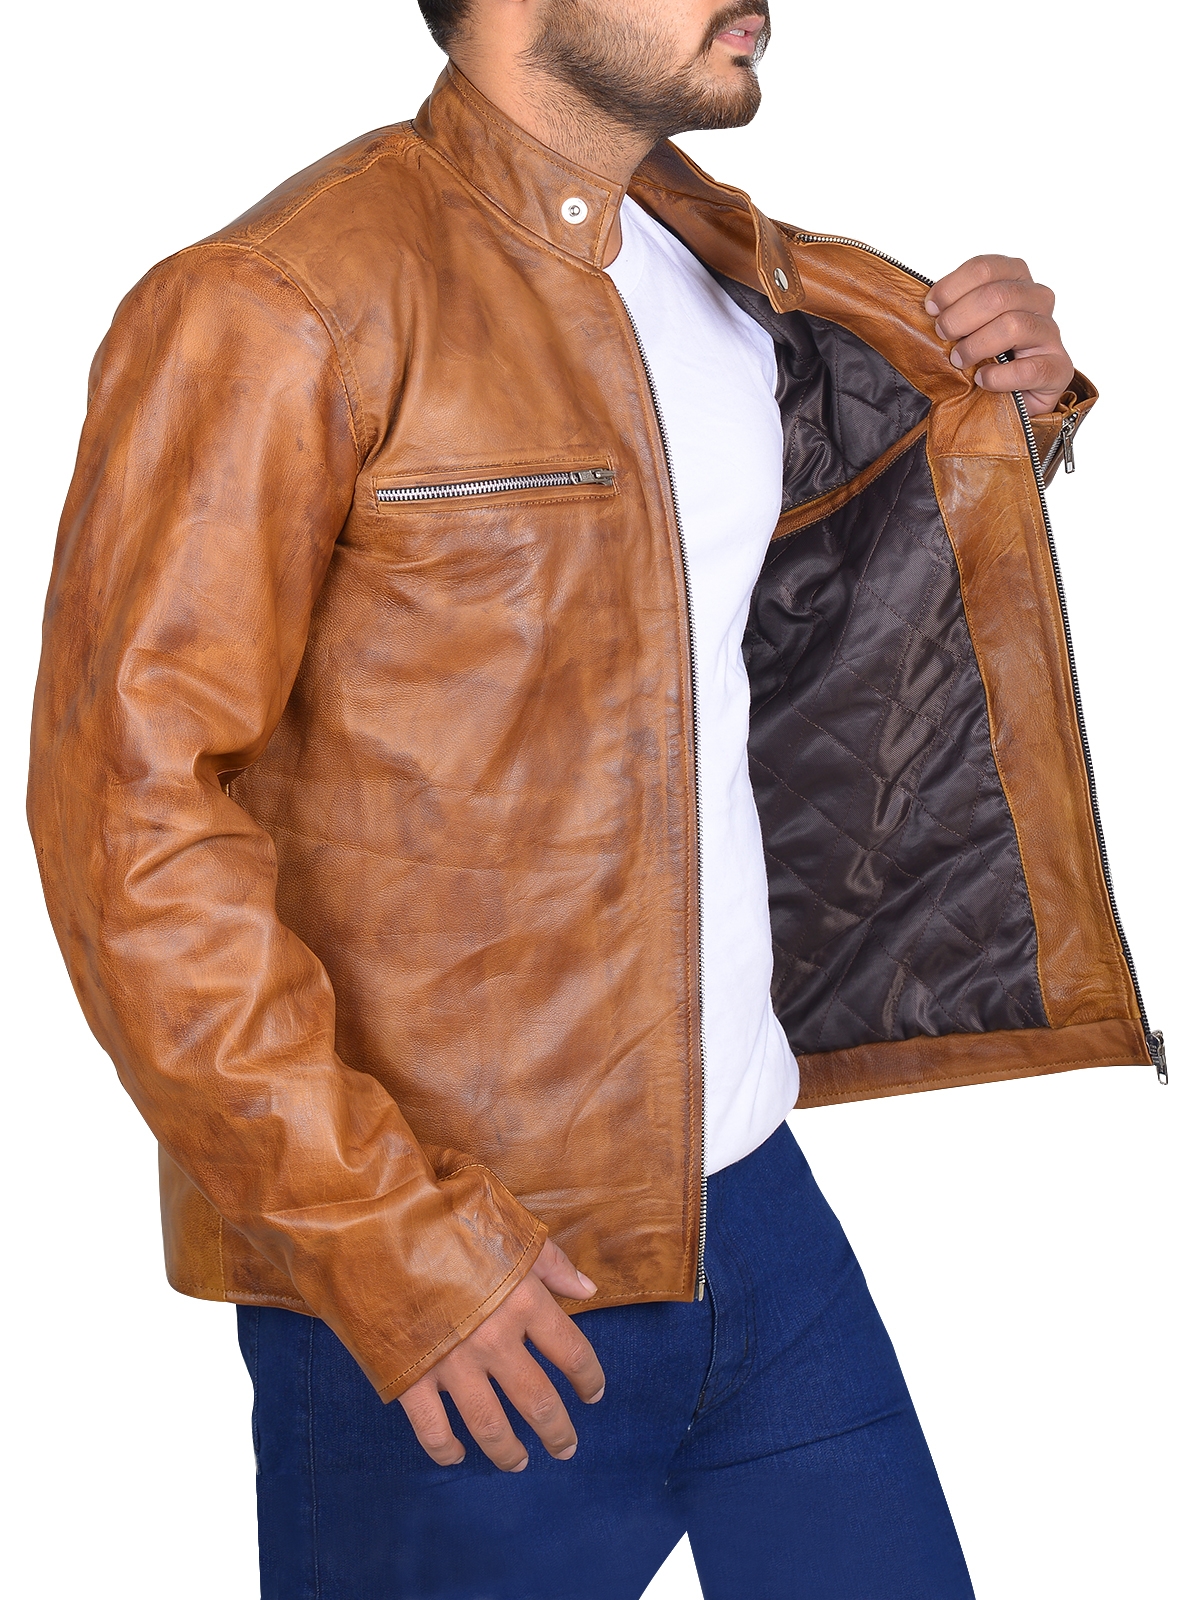 leather jackets men - Buy leather jackets men Online Starting at Just ₹371  | Meesho